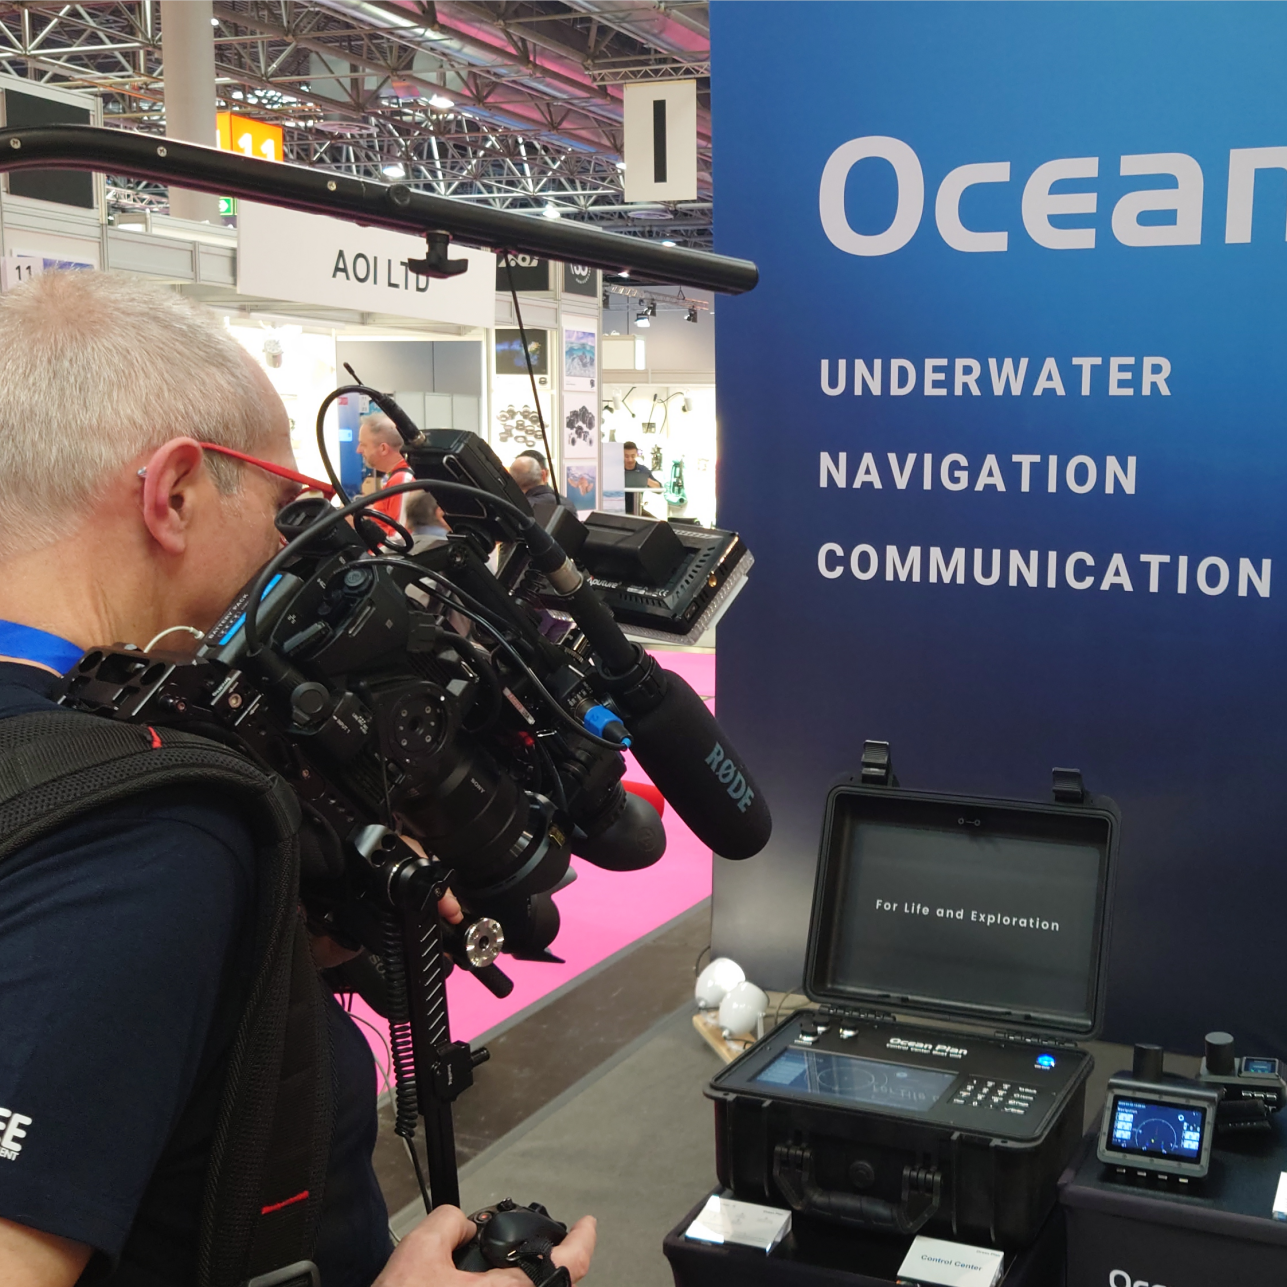 Ocean Plan attend in Boot Dusseldorf 2024 to present UW communication and Navigation System